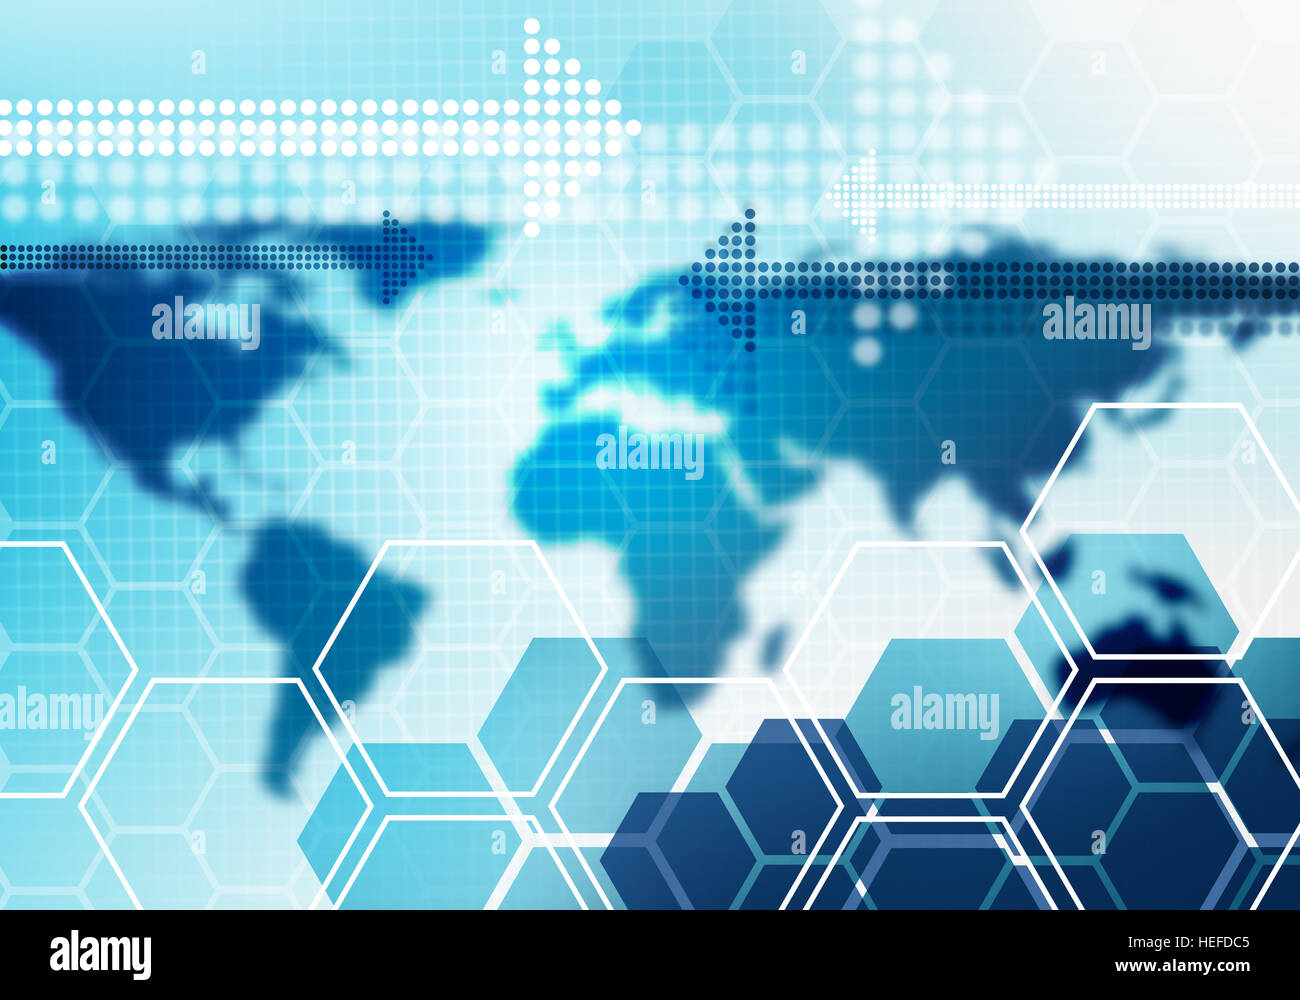 Digital conceptual gradiented image hexagon striped business technology background with arrow and blured world map for corporate brand, presentation, Stock Photo